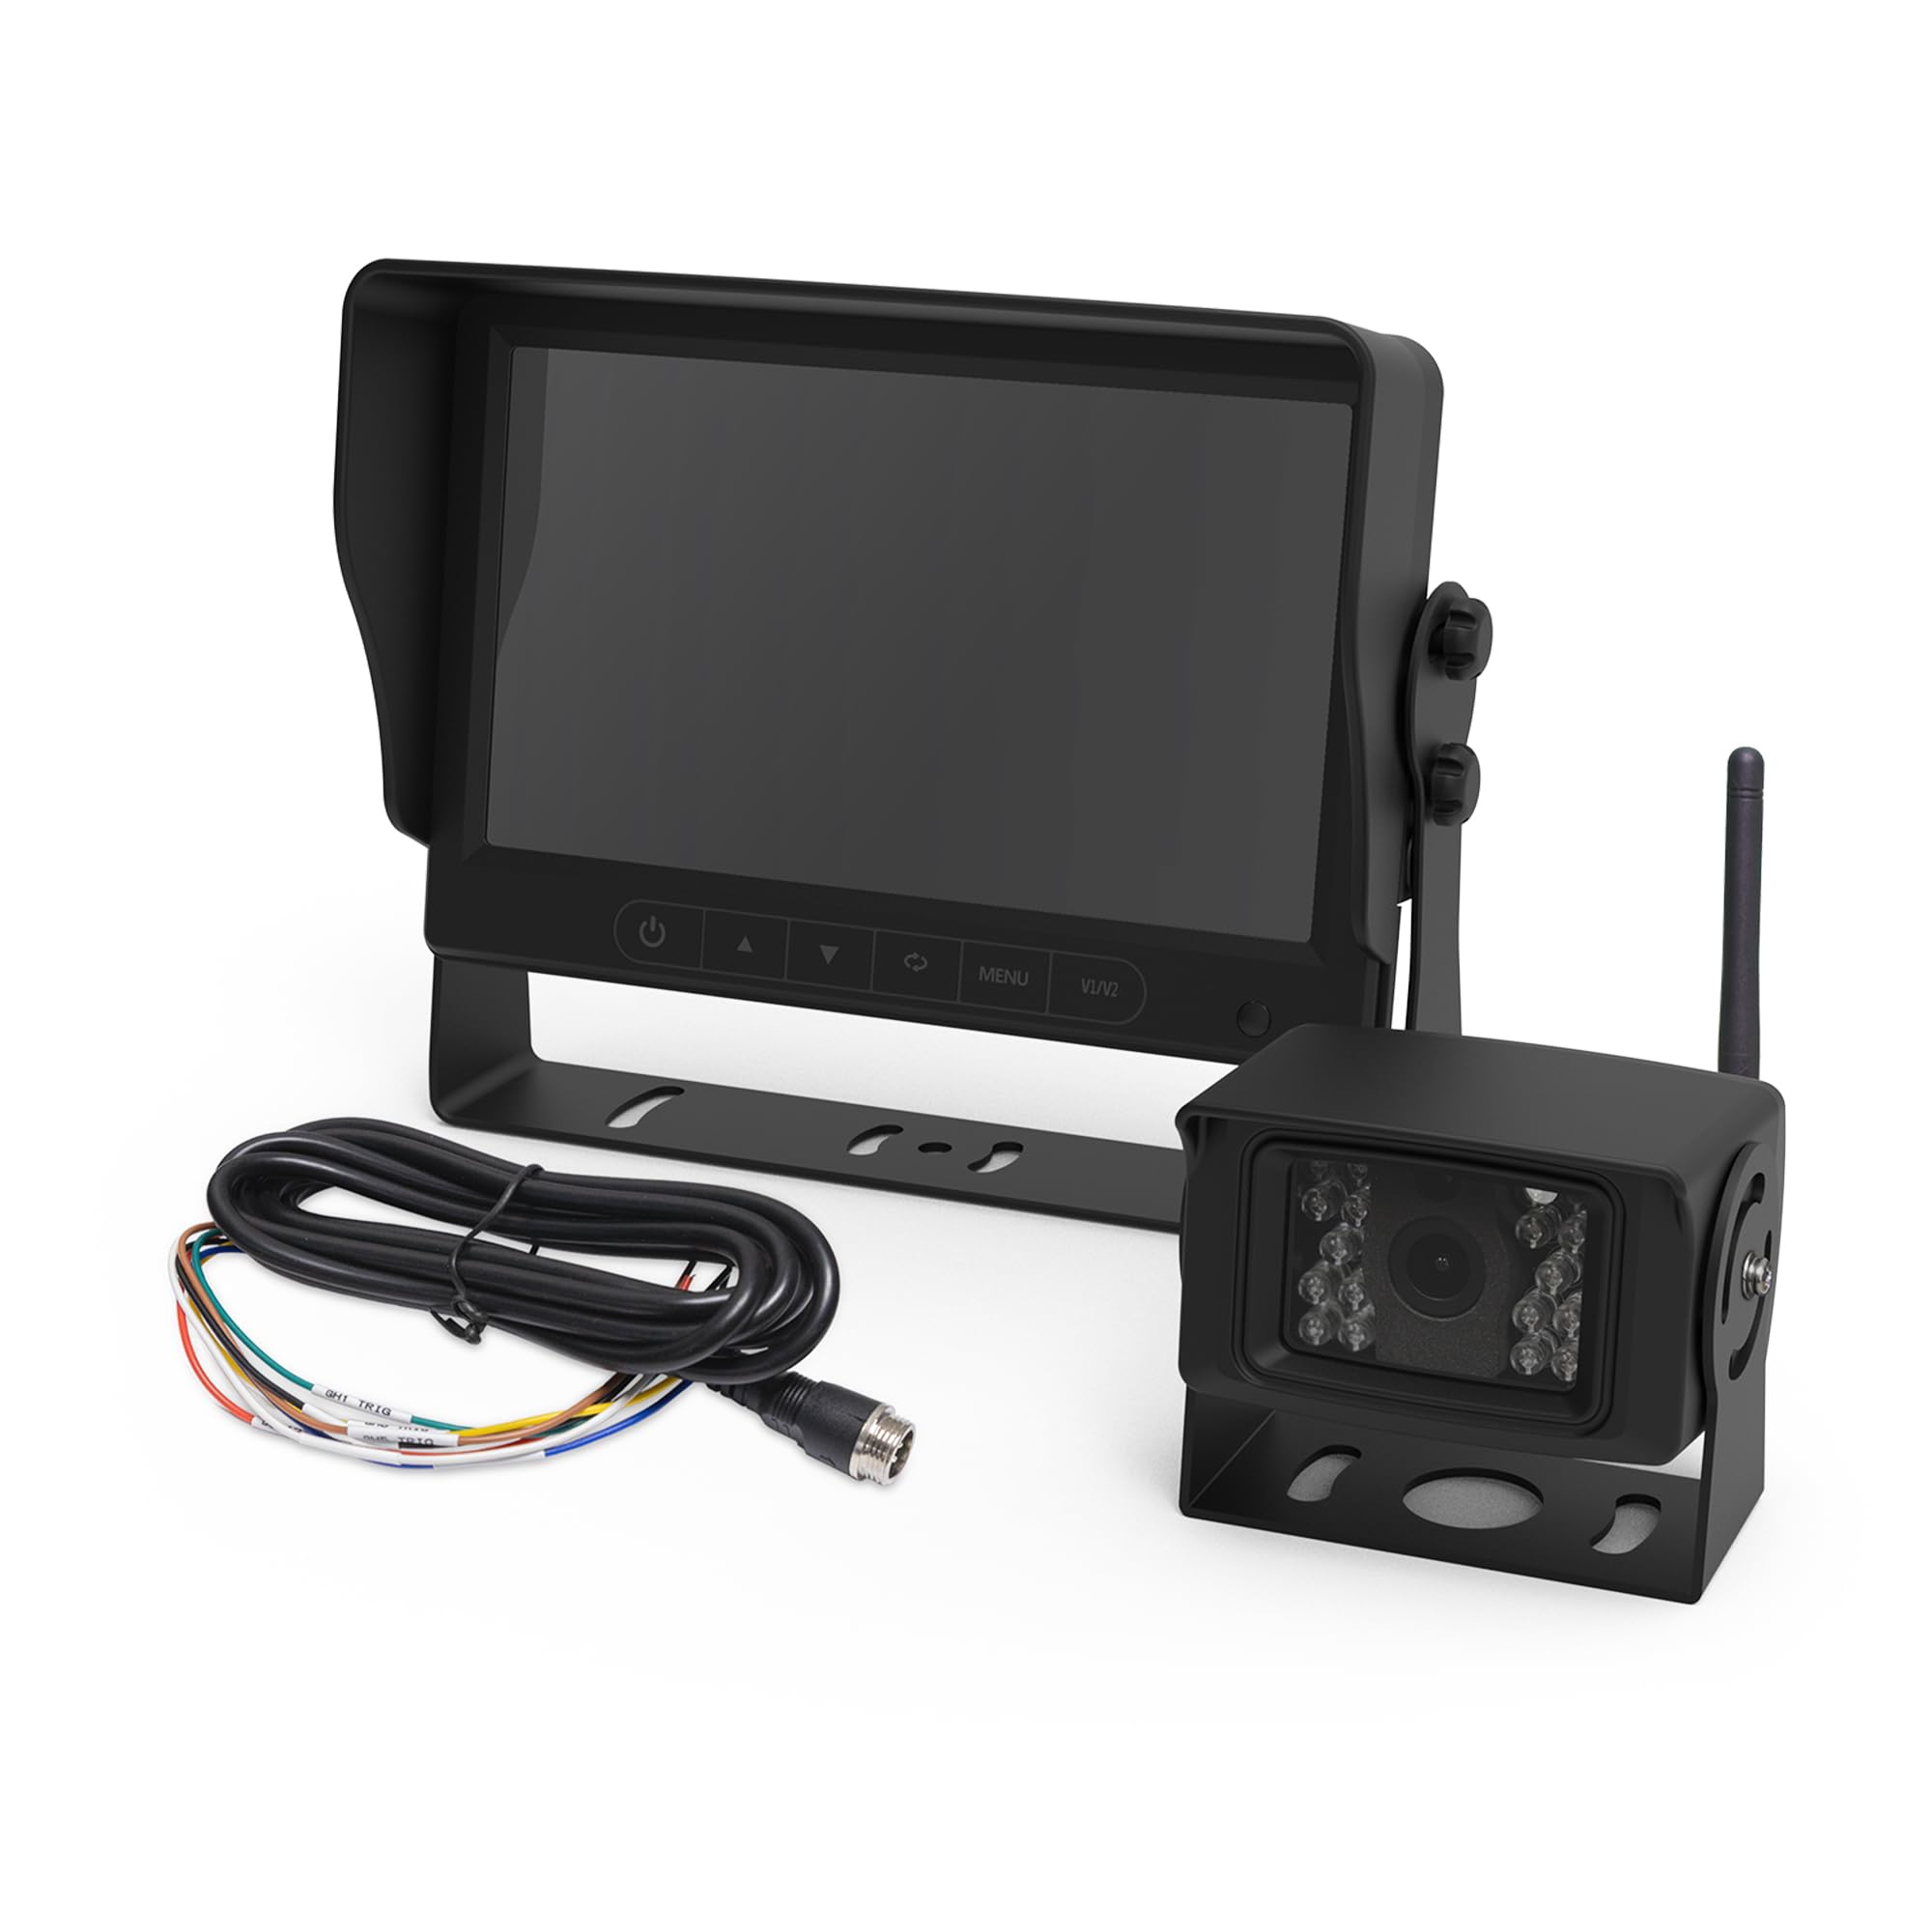 CAMERA KIT 7IN LCD COLOR WIRELESS SYSTEM